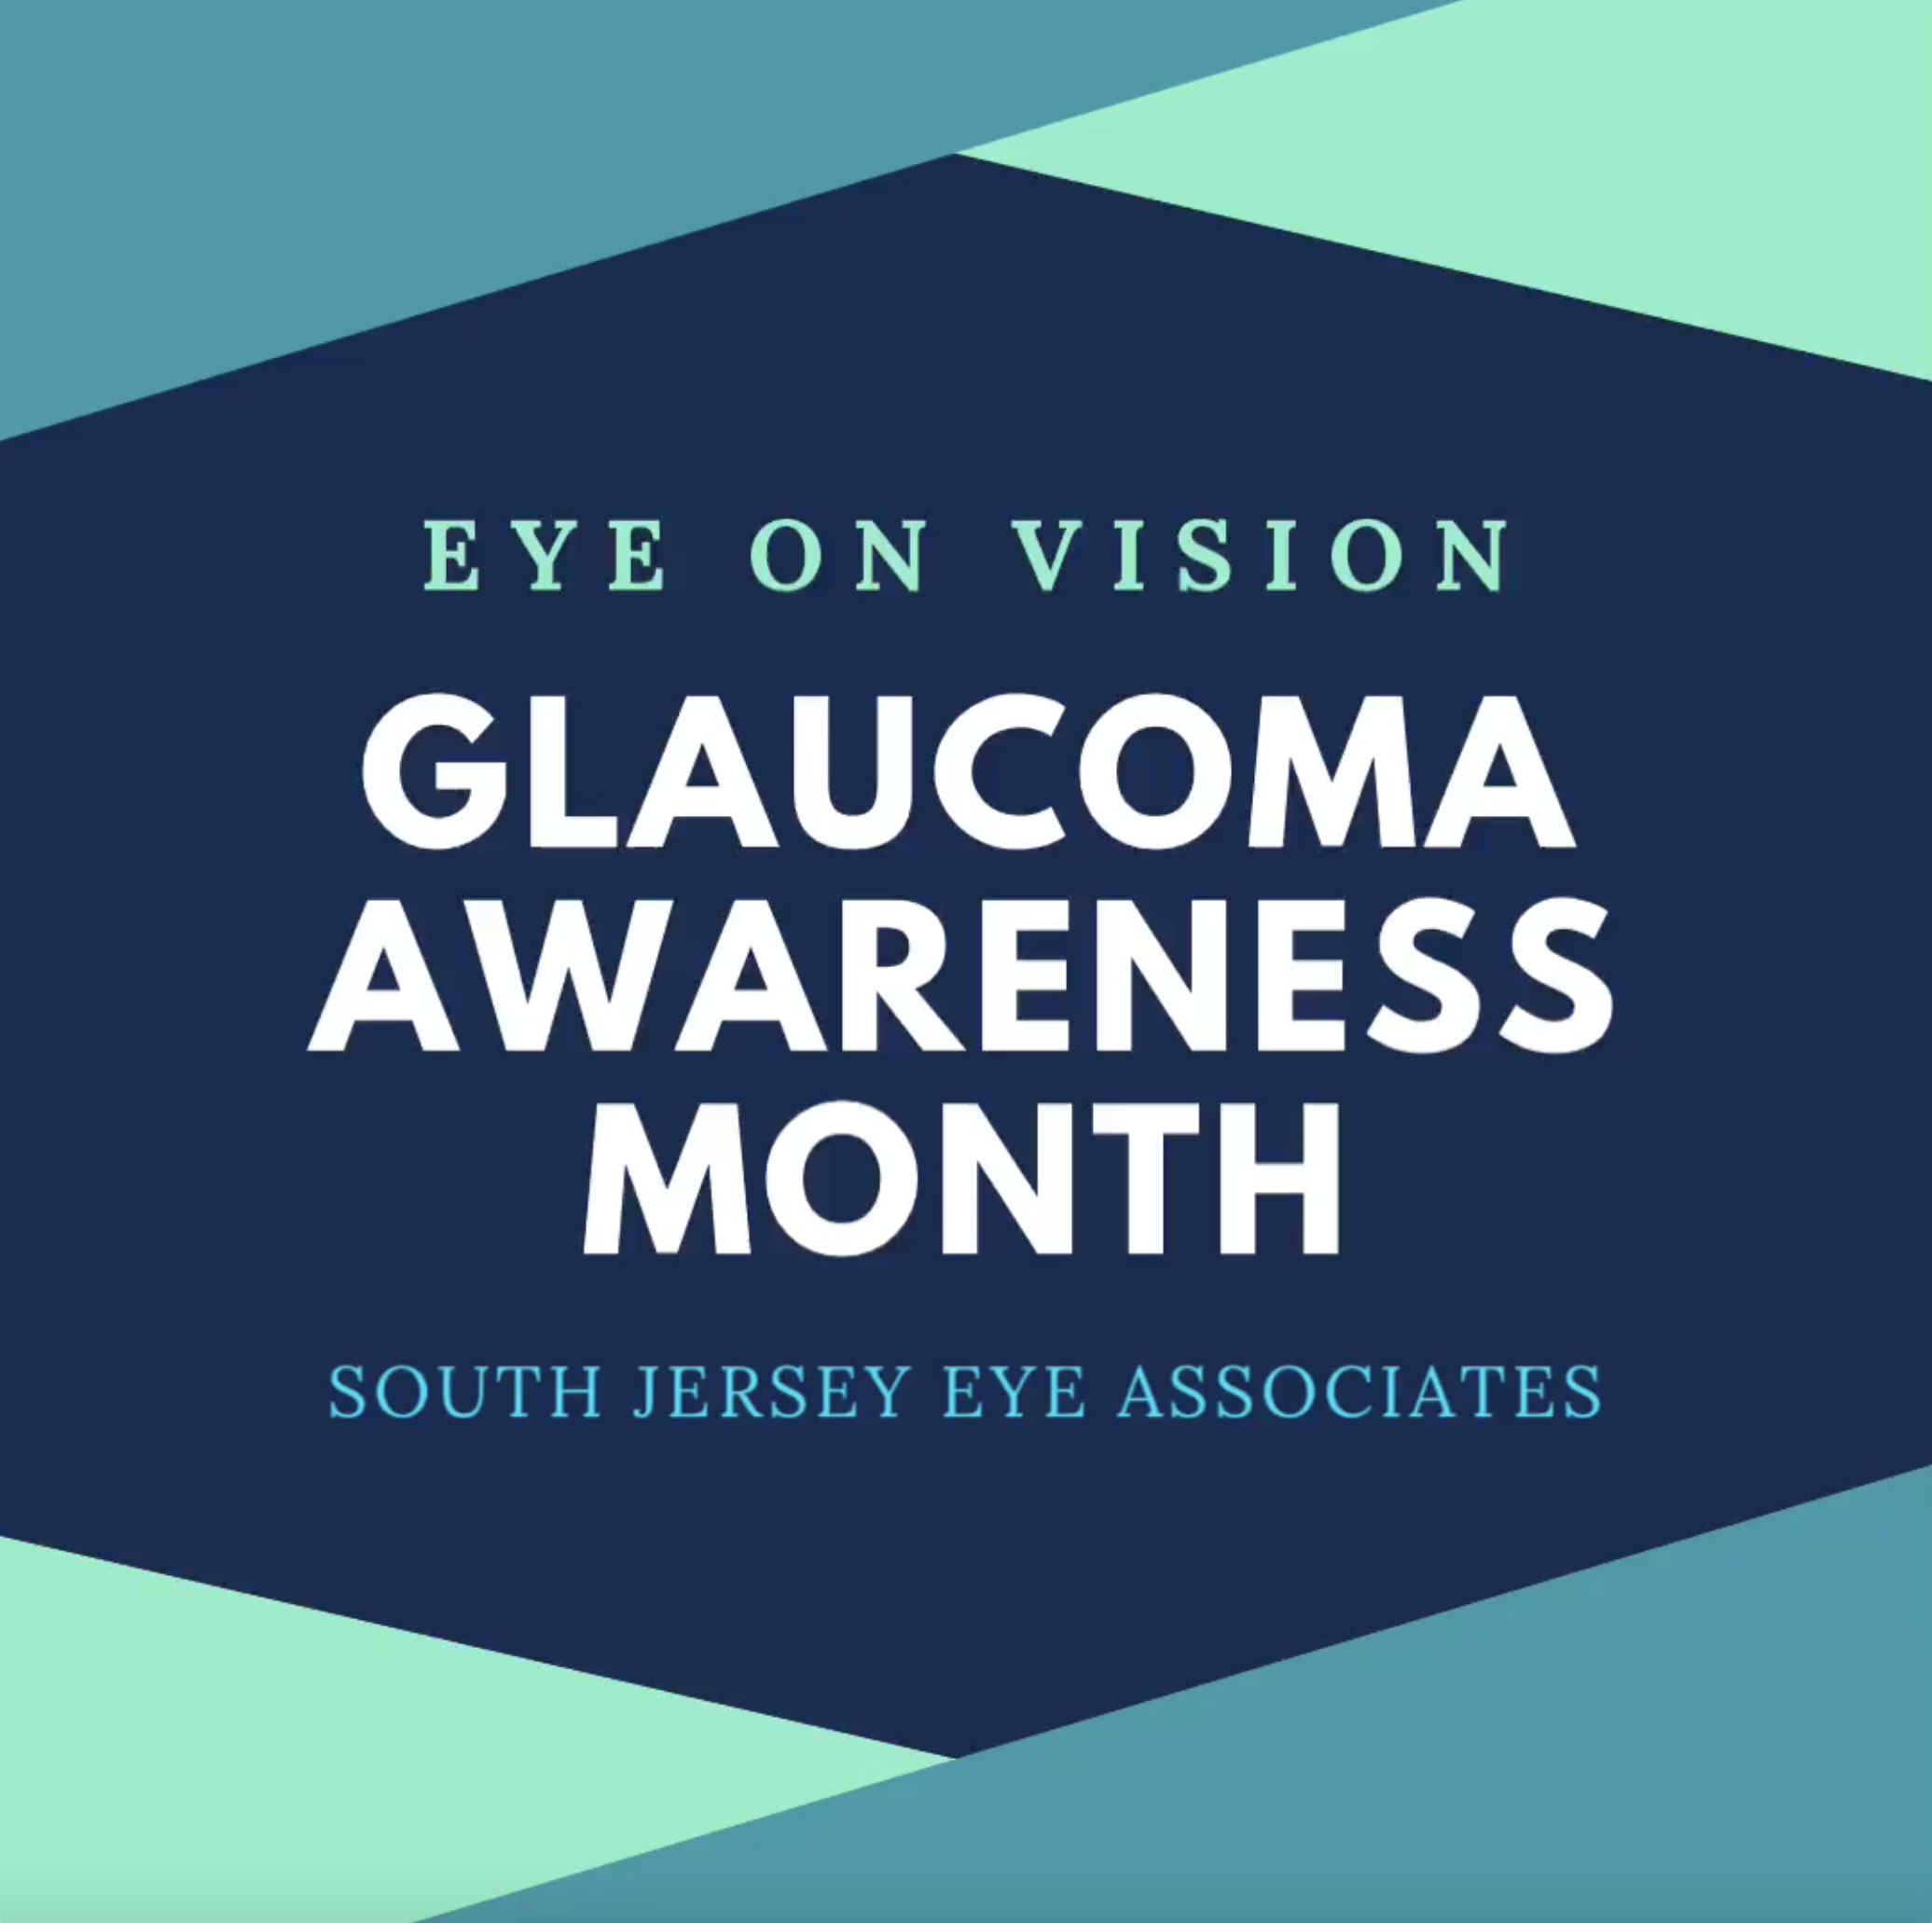 EYE ON VISION: GLAUCOMA AWARENESS MONTH